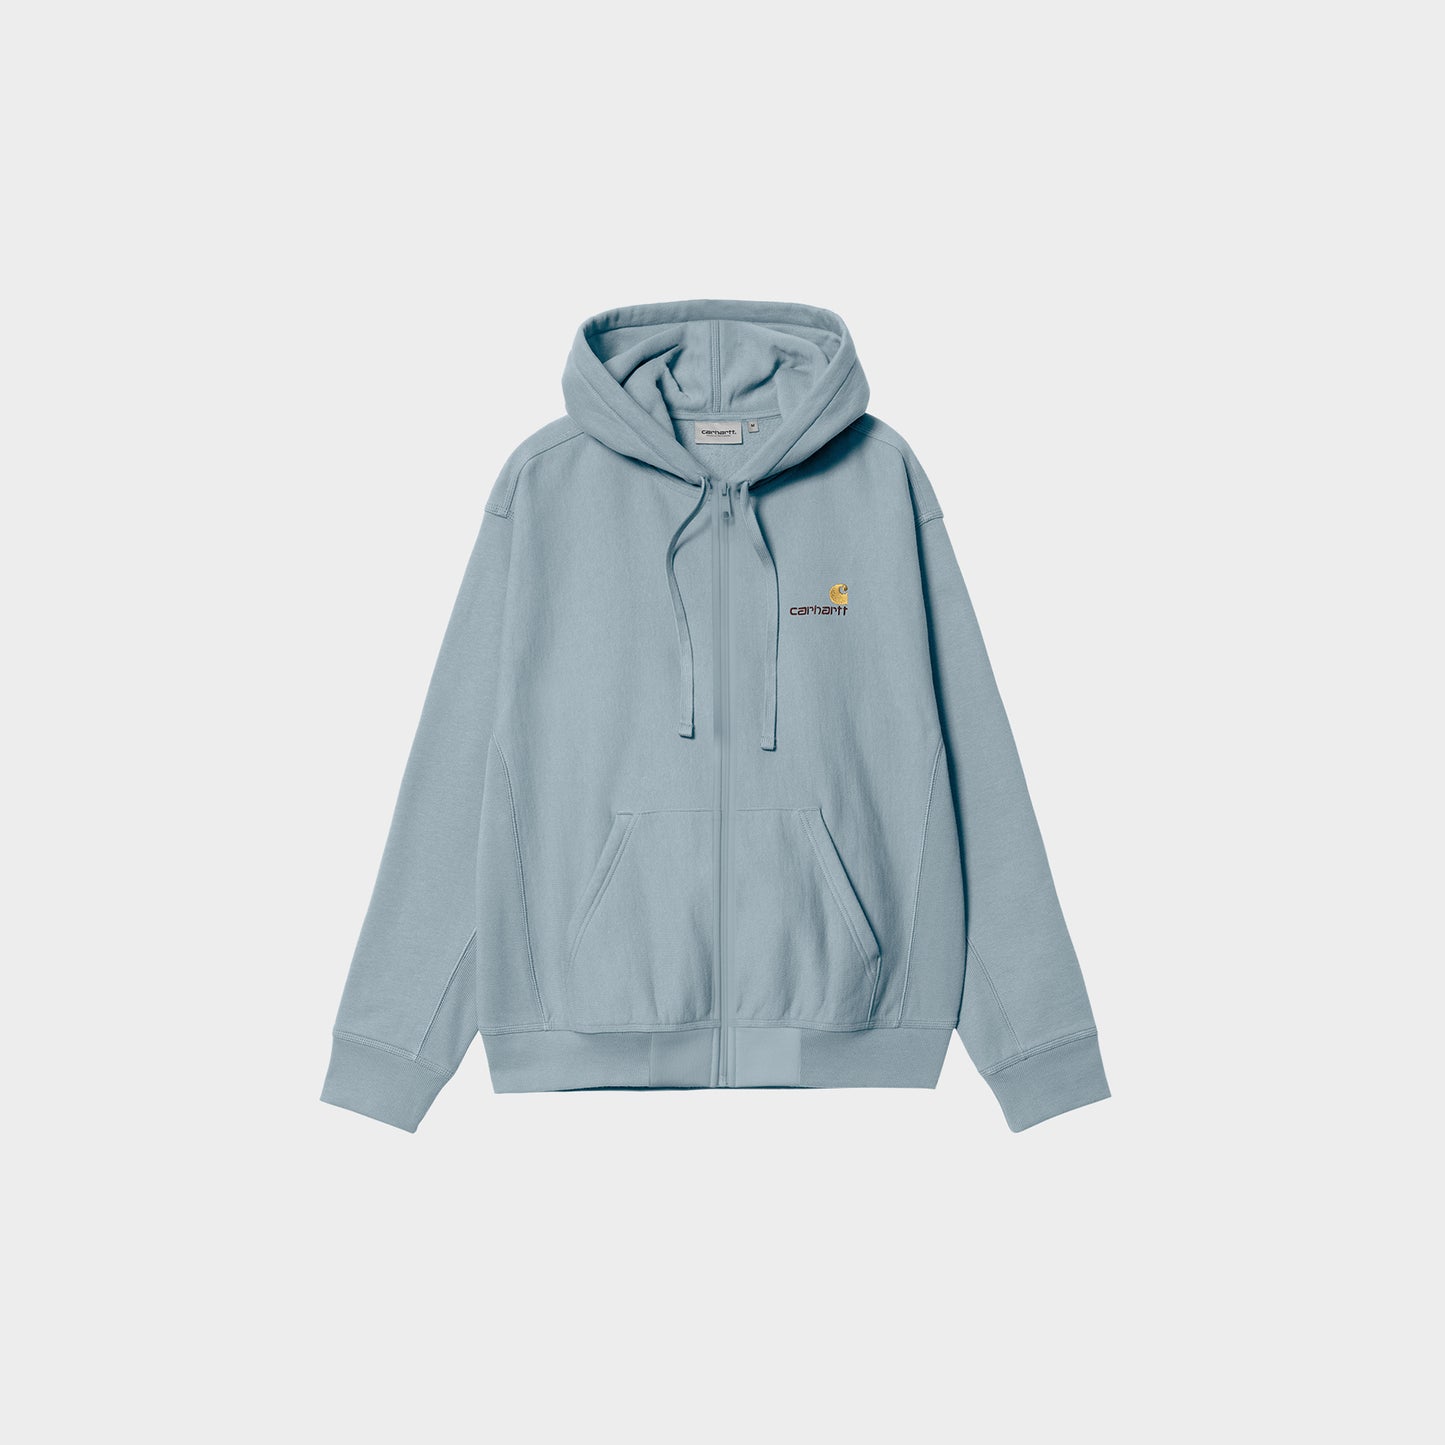 Carhartt WIP Hooded American Script Jacket in Farbe frosted_blue